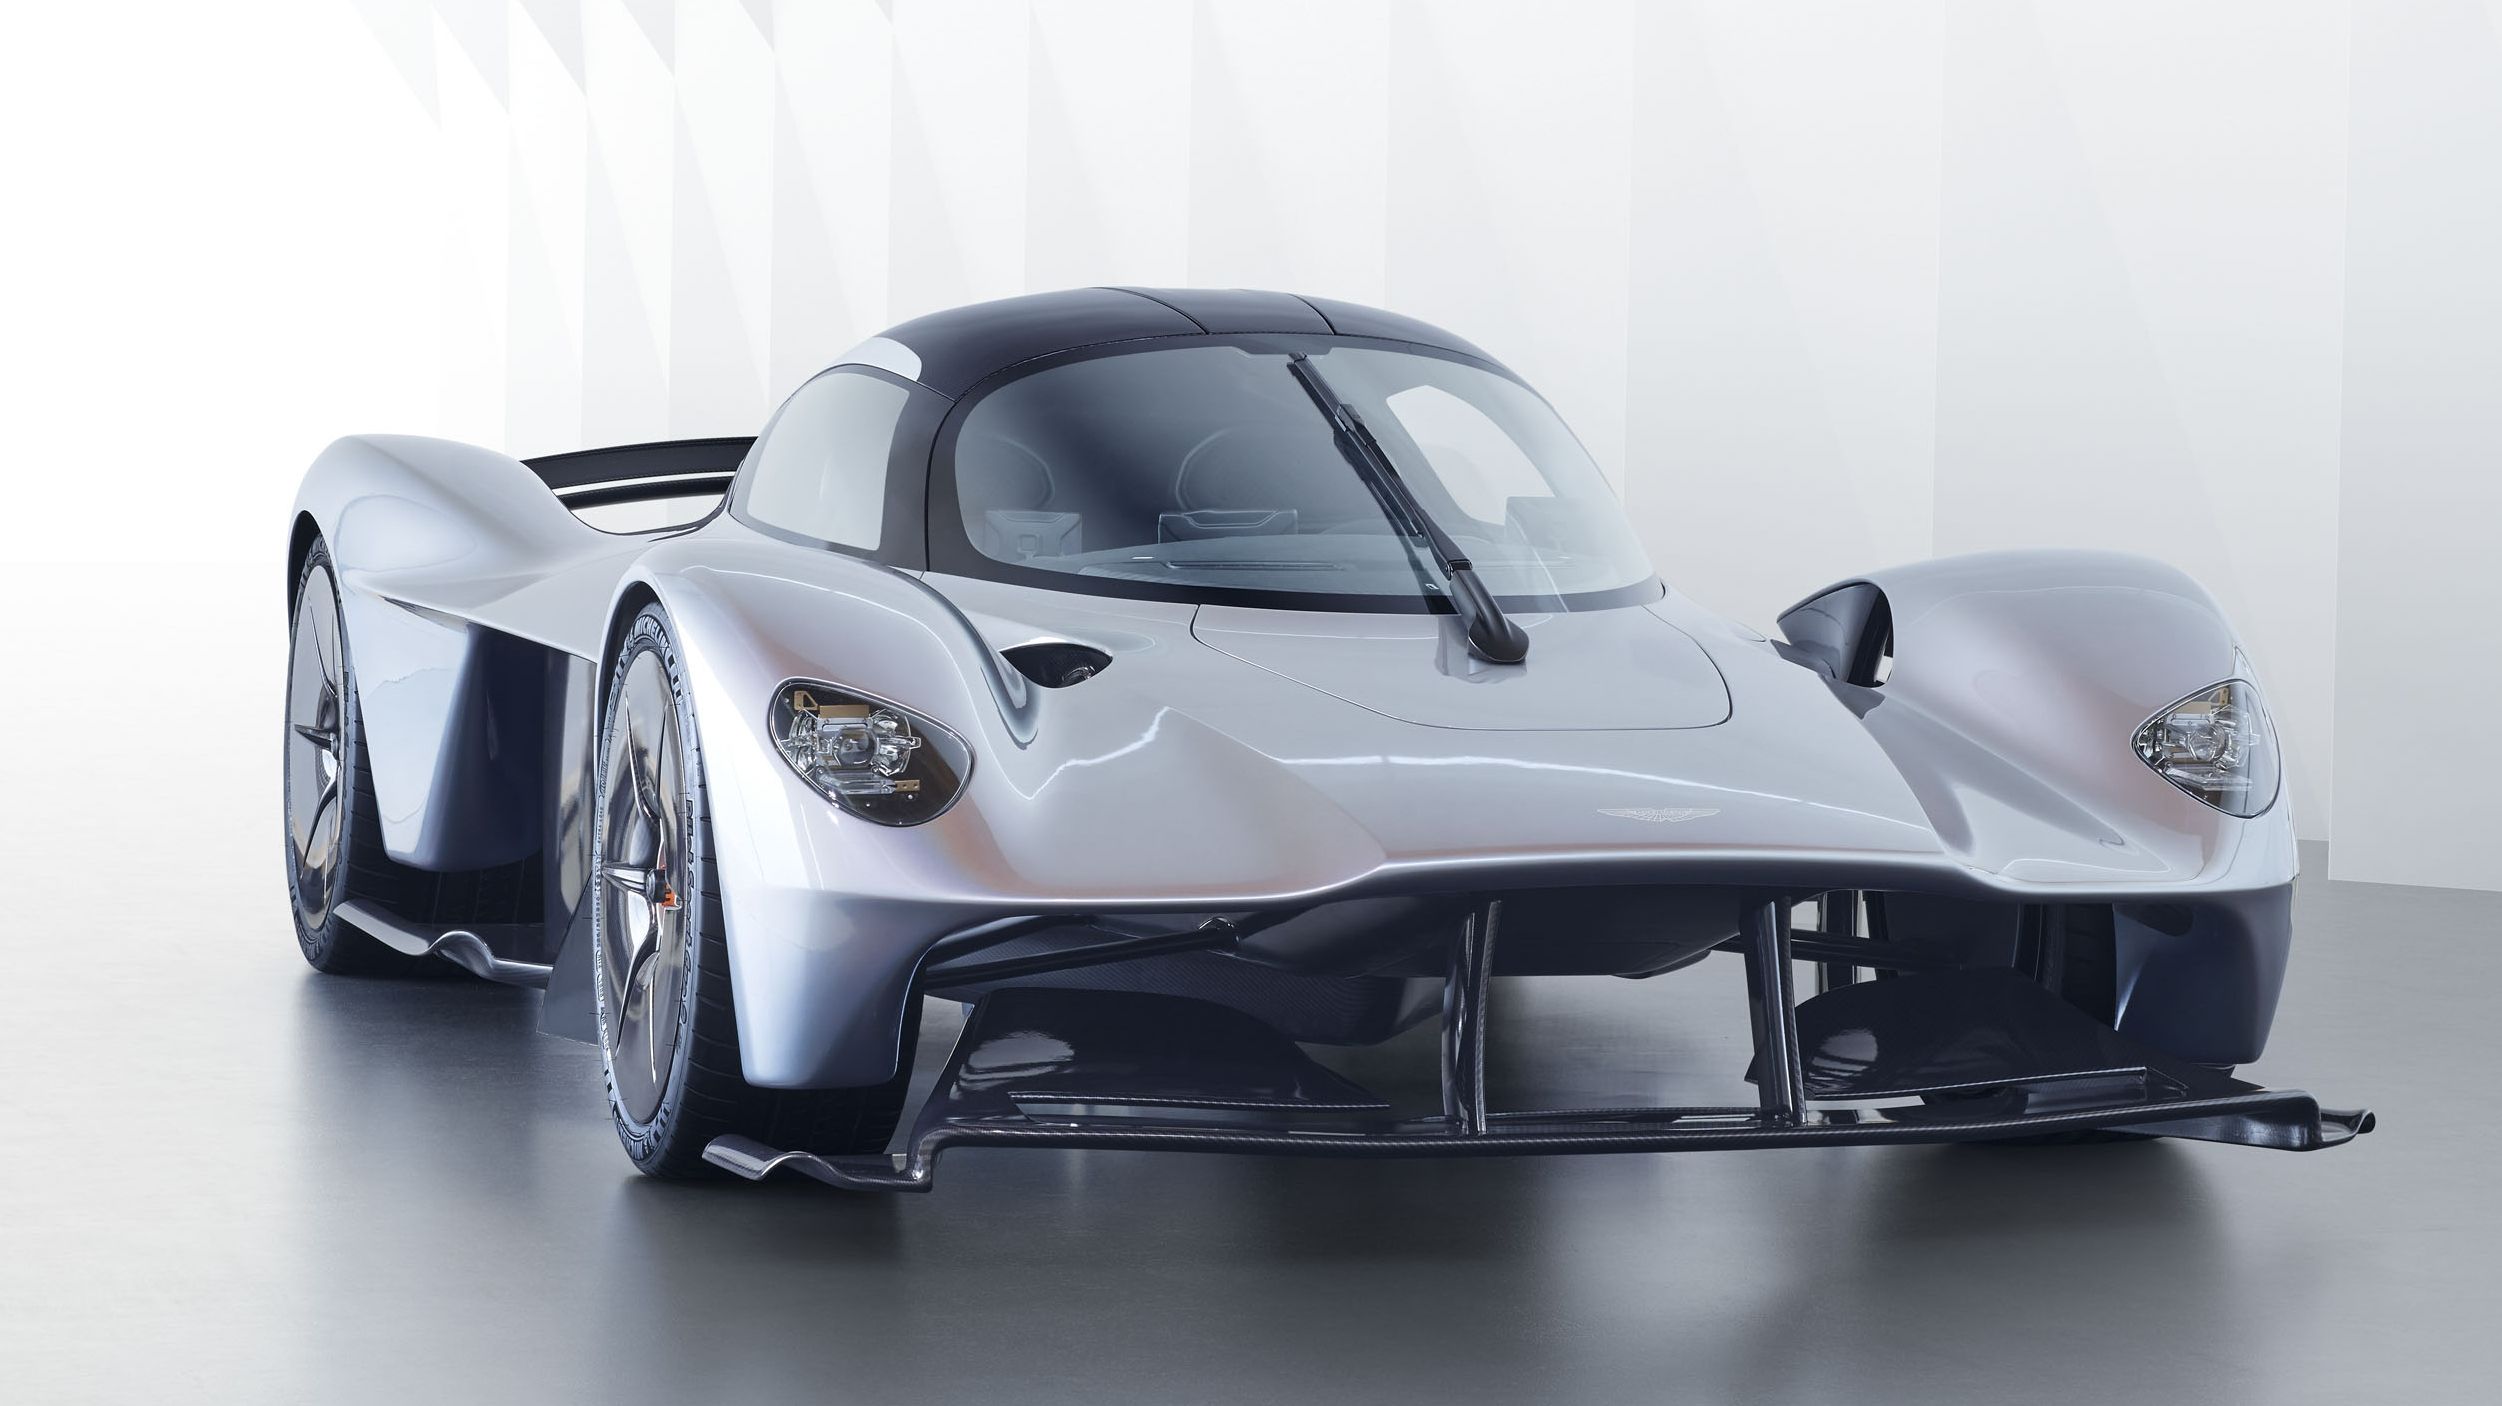 2018 Aston Martin Valkyrie Is Getting Ready For Its Close-up